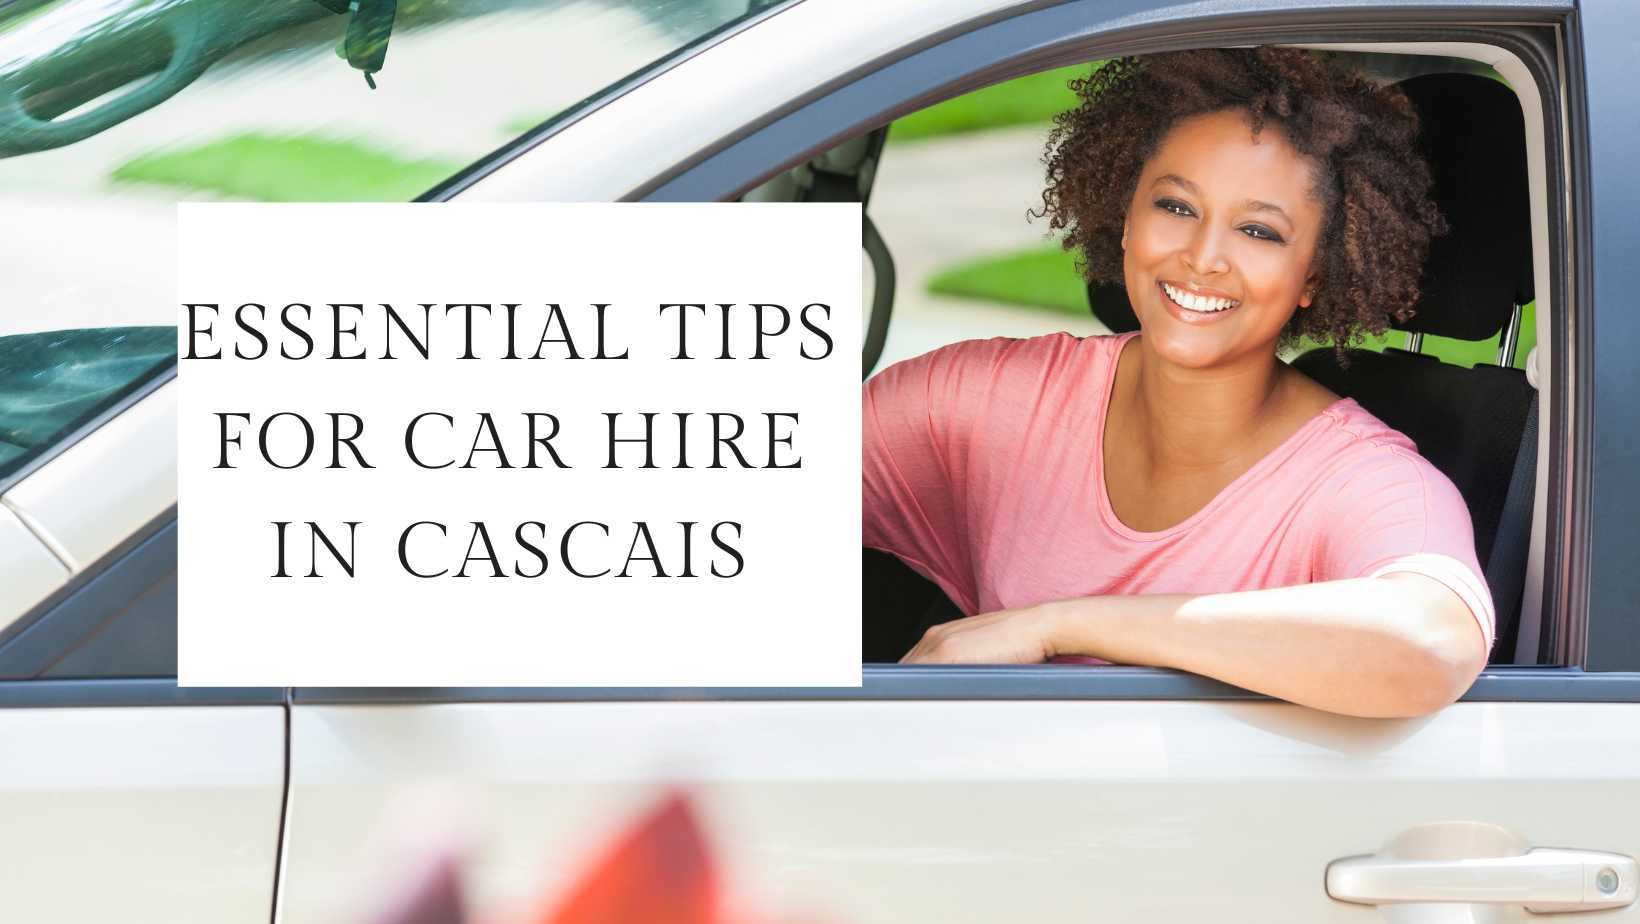 Essential Tips for Car Hire in Cascais